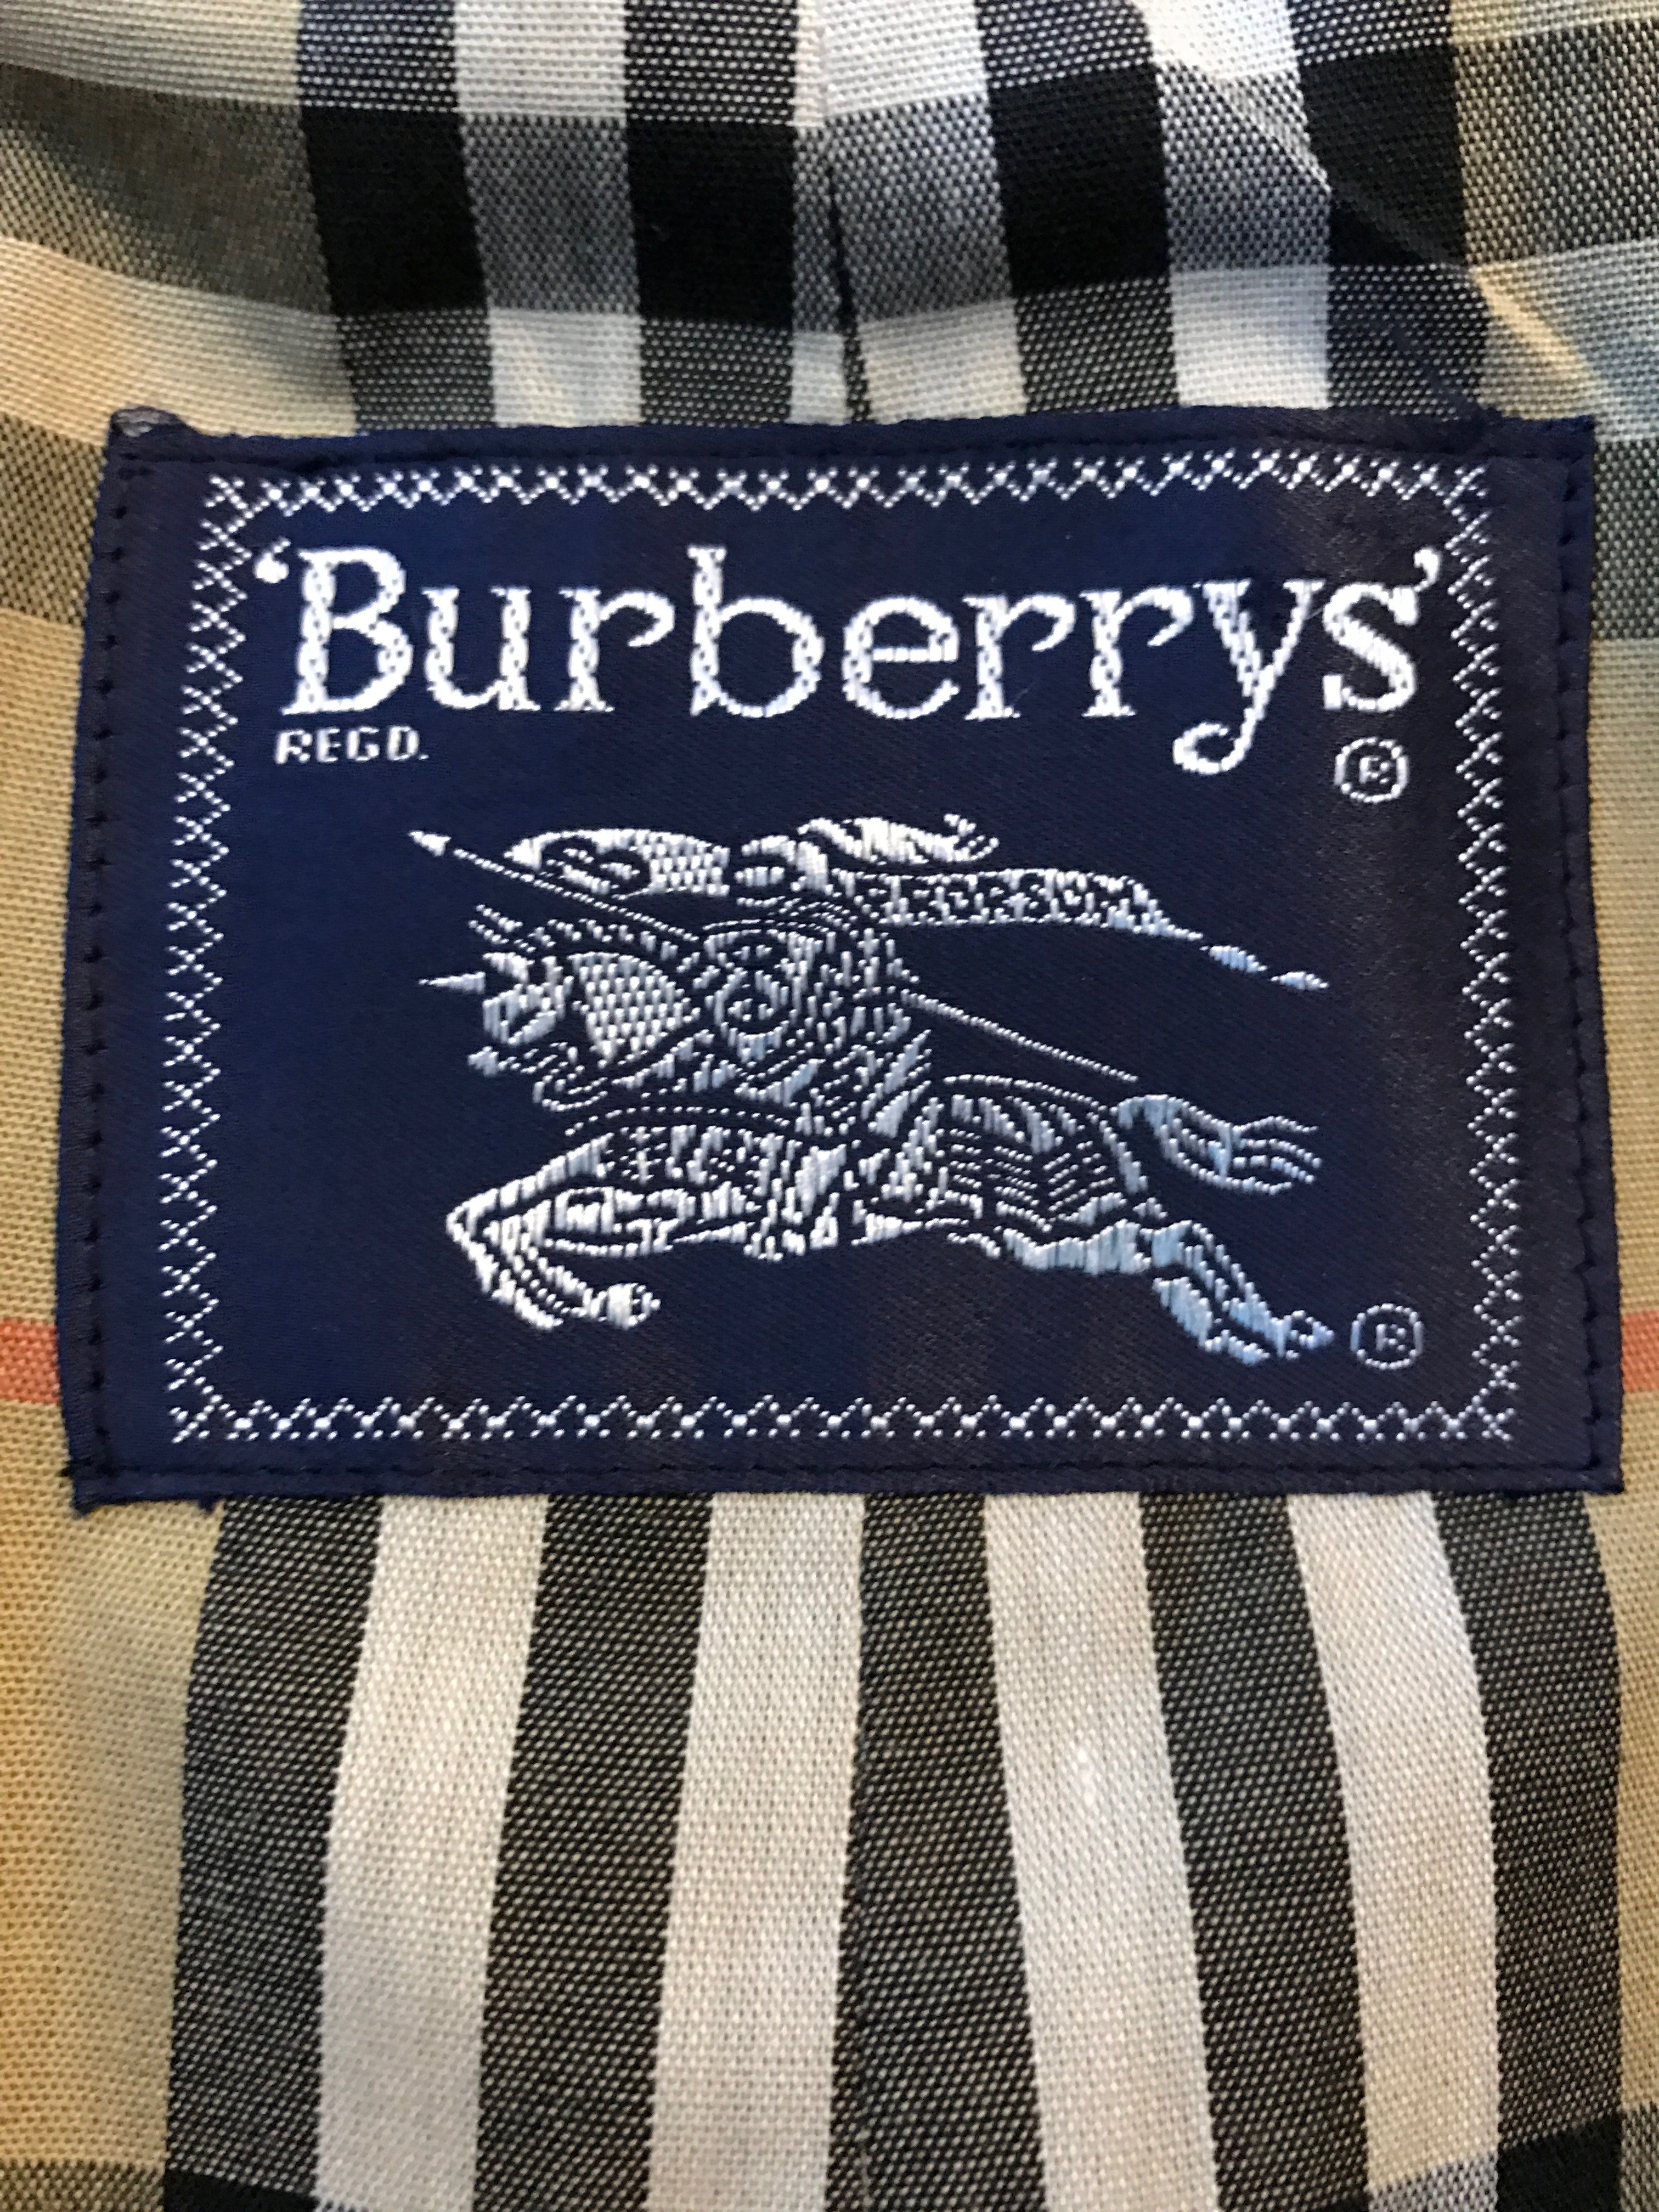 burberry labels difference